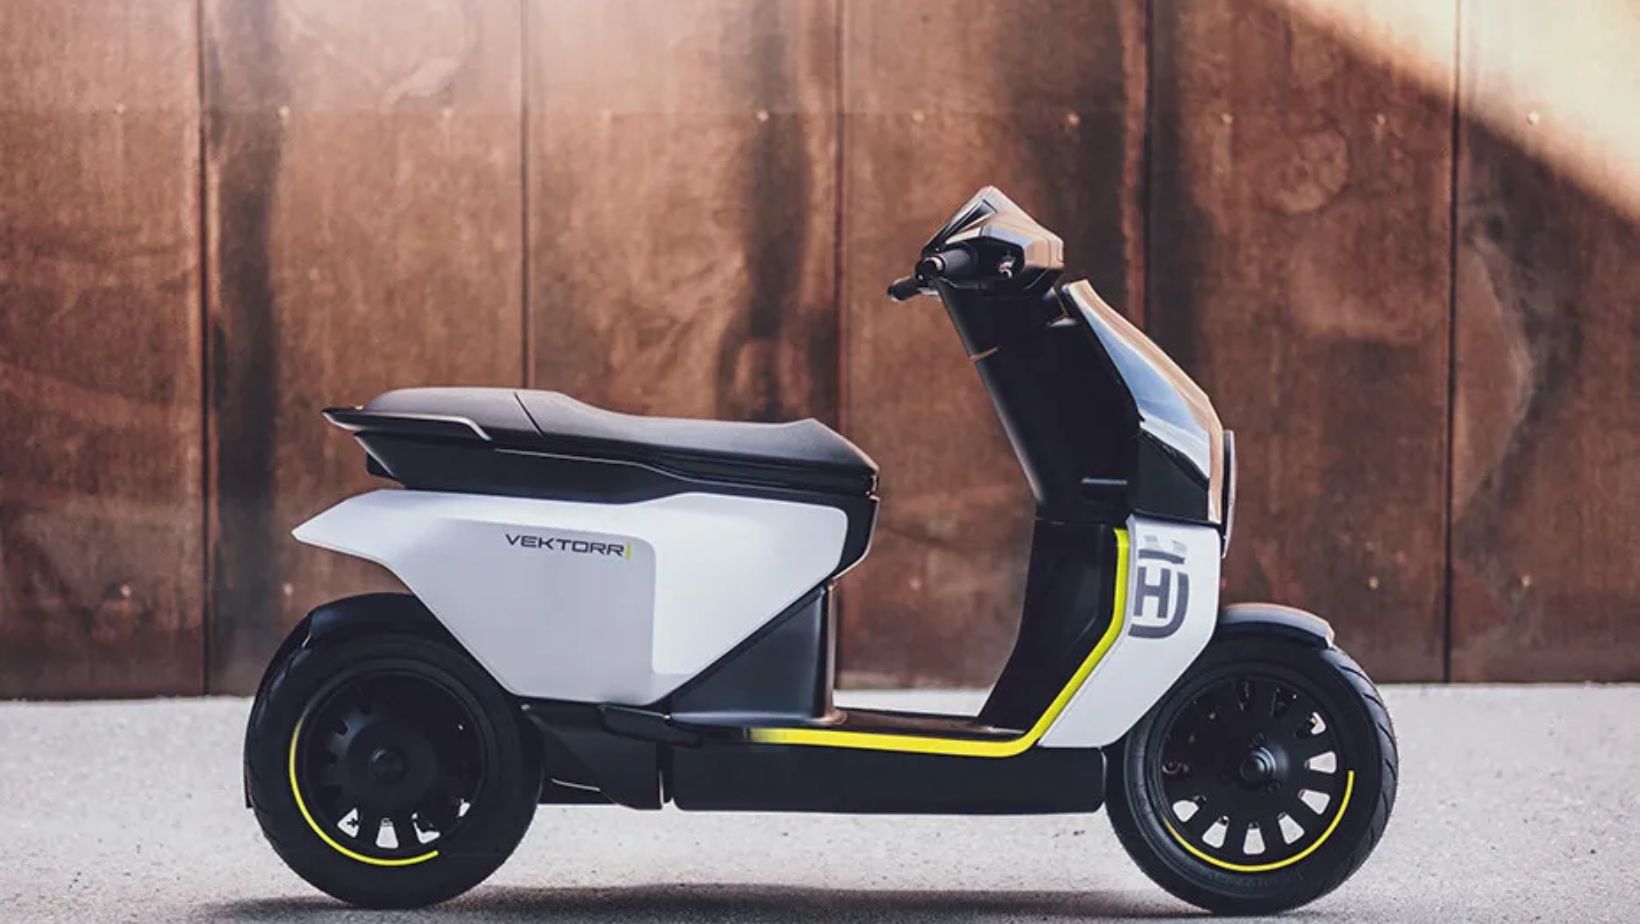 Husqvarna Vektorr Concept: Price, Launch Date, Images, Top Speed, and Review